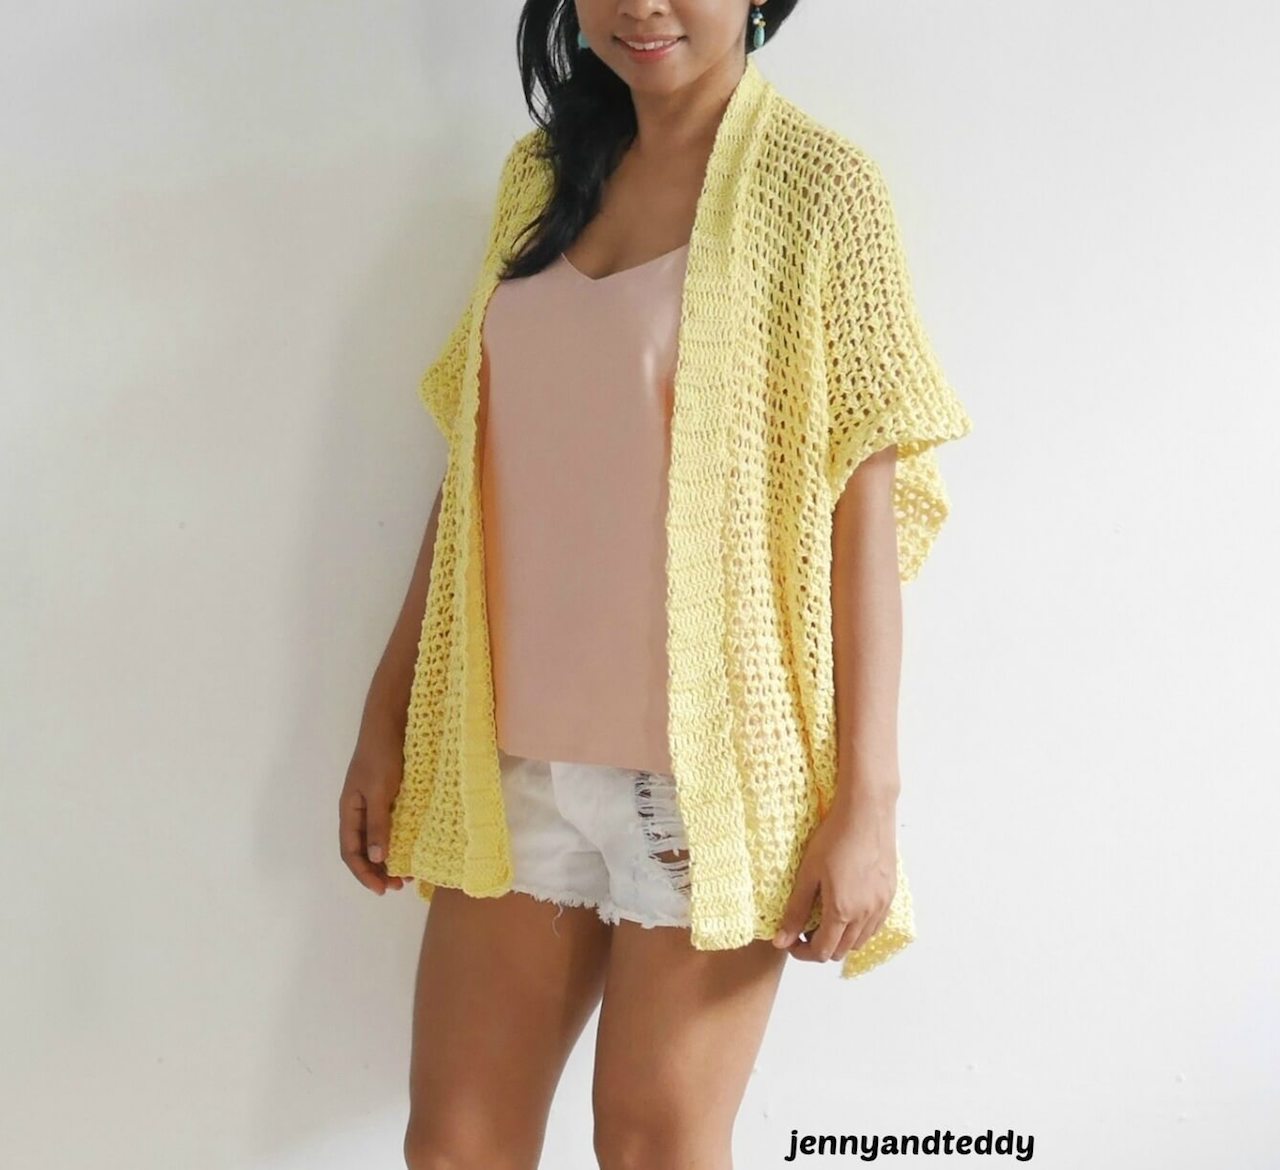 Lemonade Summer Cardigan part of a roundup by www.itchinforsomestitchin.com